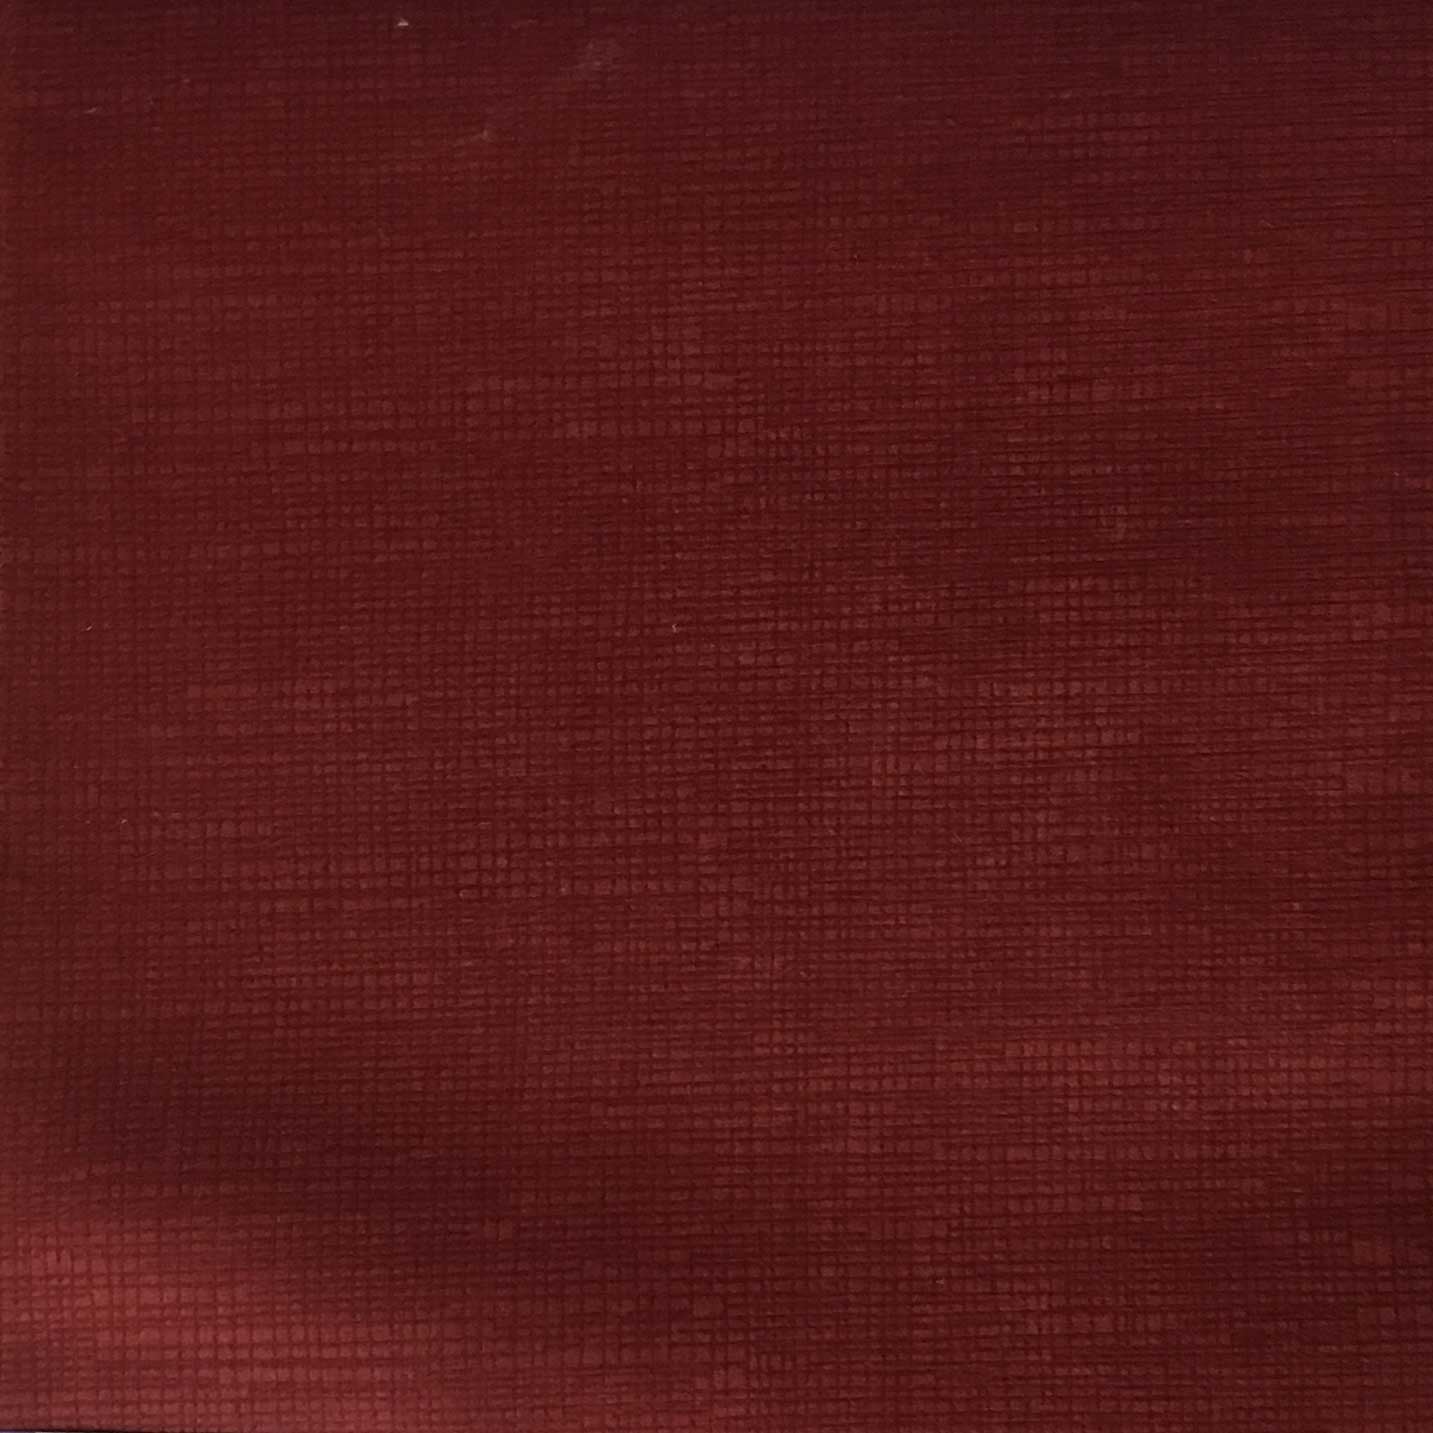 Creek - Textured Microfiber Velvet Upholstery Fabric by the Yard